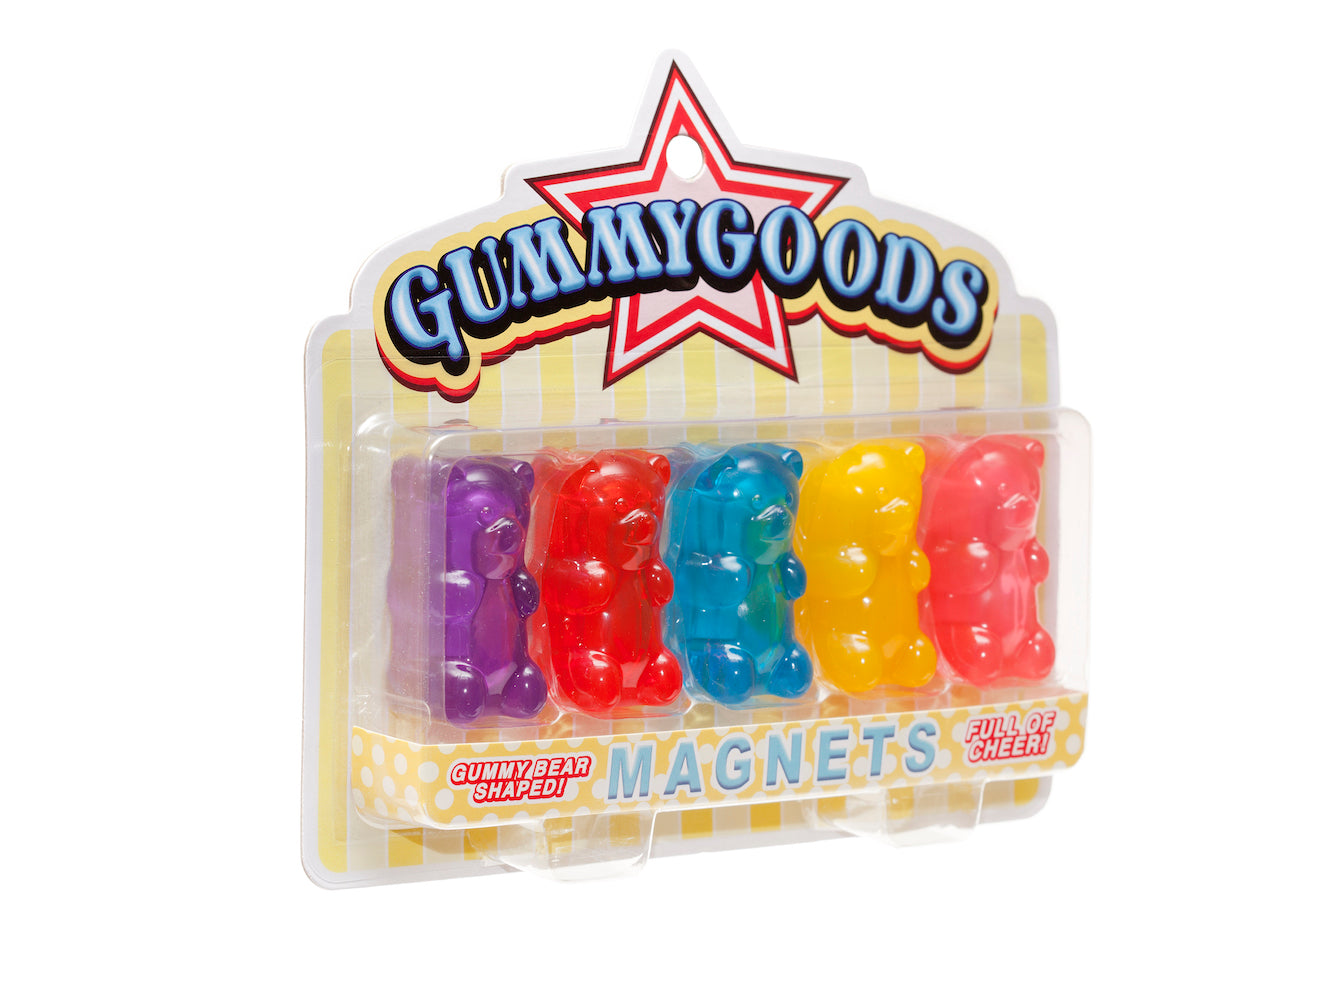 Gummygoods - Set of 5 Magnets - Mixed Colors